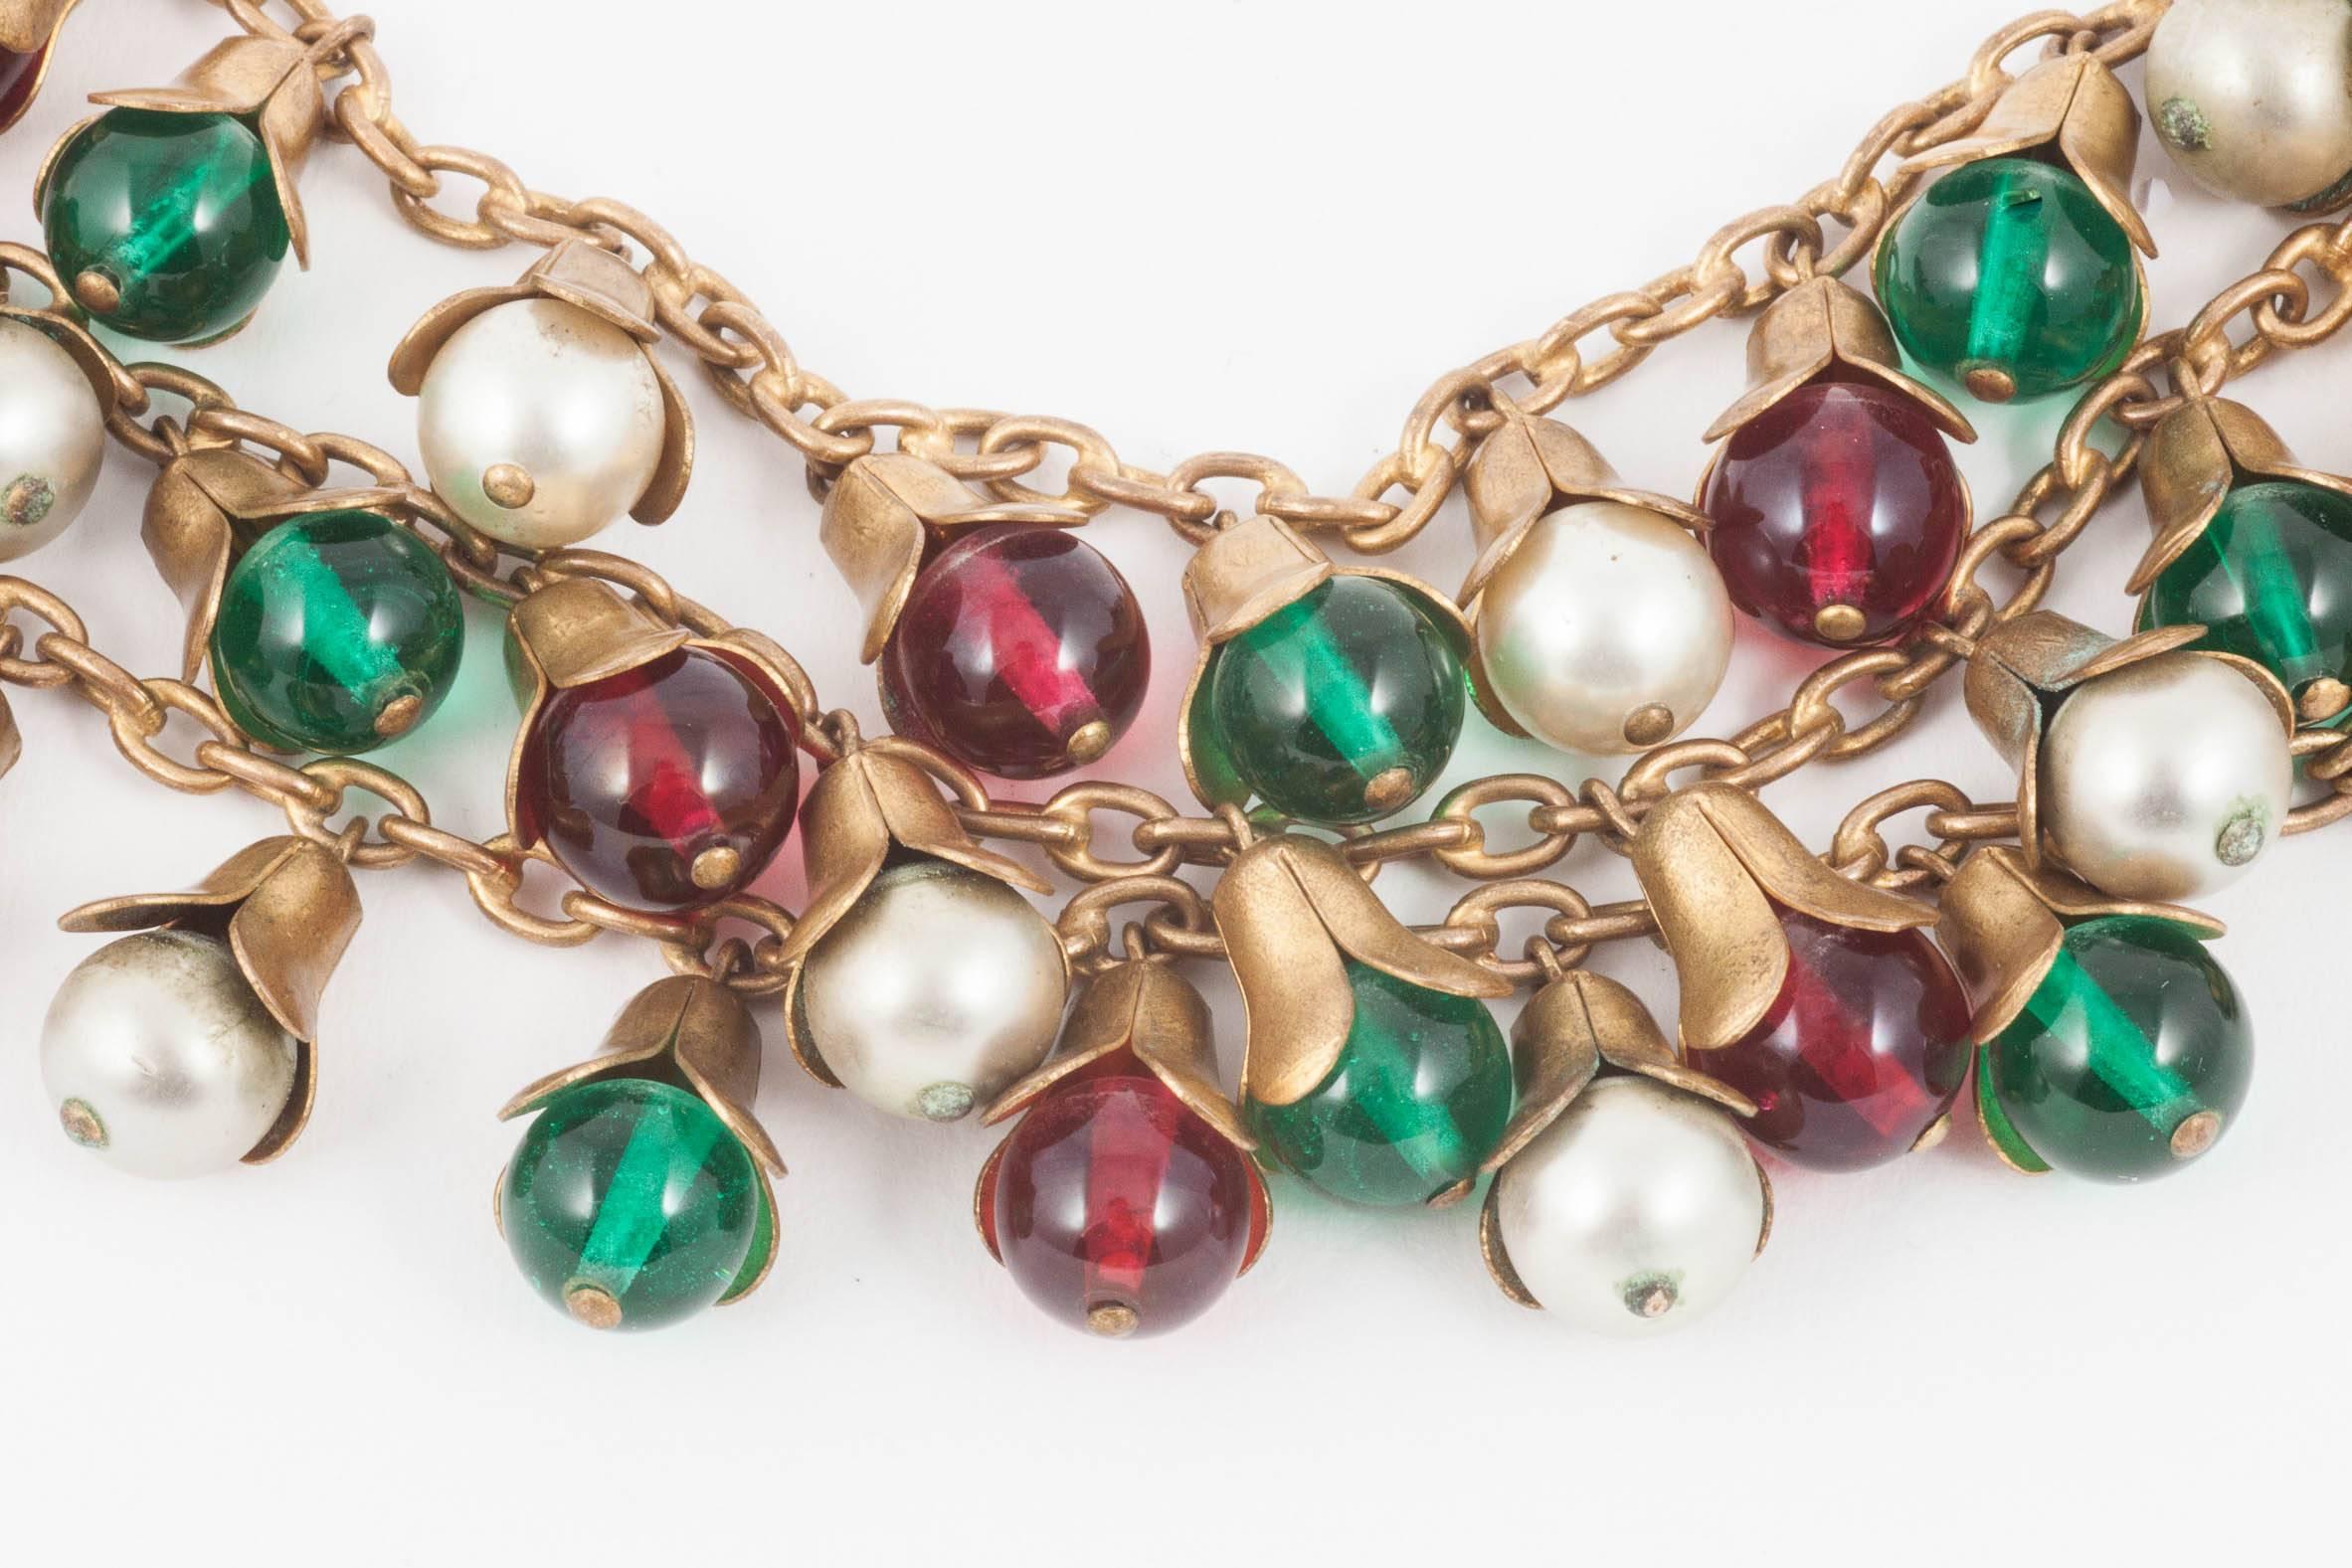 This classic combination of red and green glass with mother of pearl is always a great look and this bracelet is no exception. Unsigned but with a quality, weight and tactile wearability, it would fit into a casual as well as more tailored ensemble.